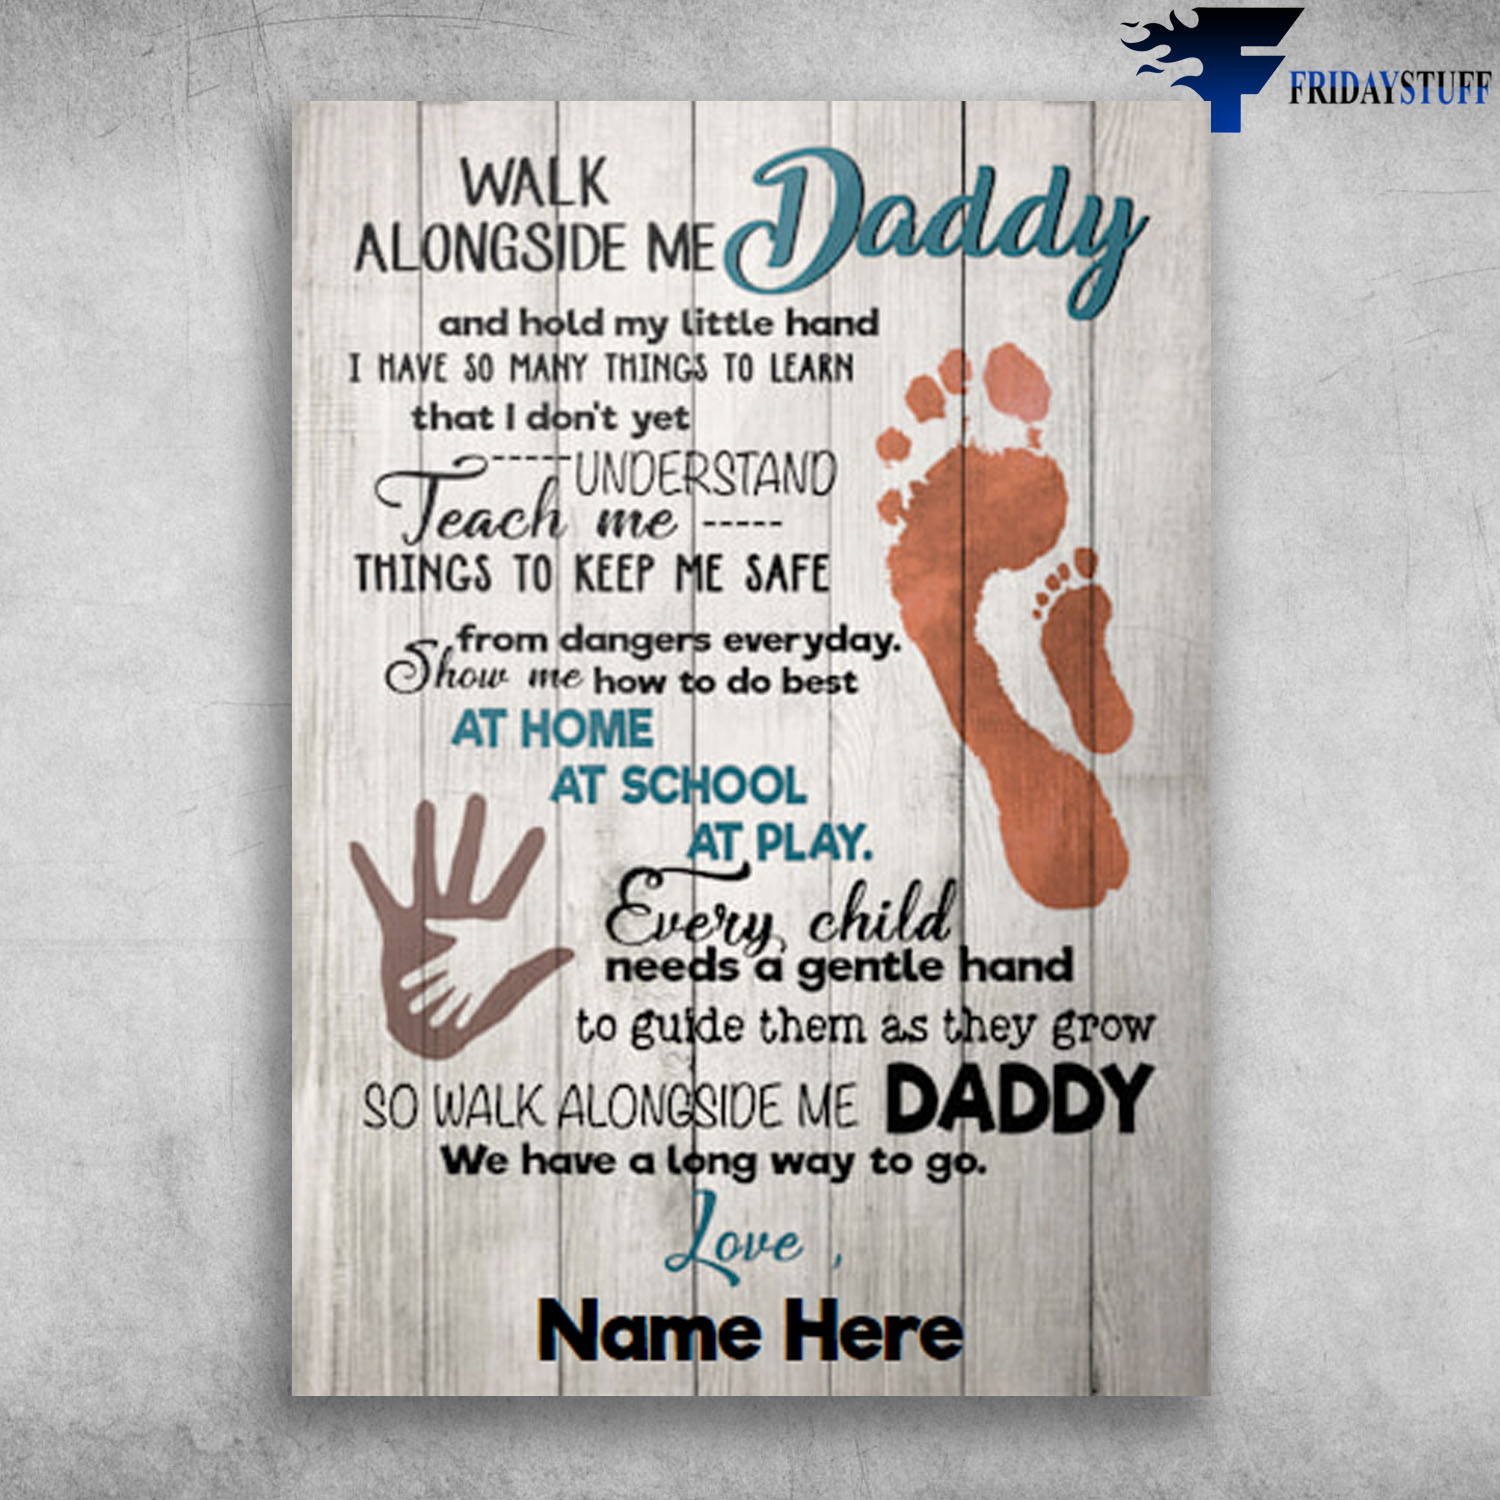 Every Child Needs A Gentle Hand To Guide Them As They Grow So Walk Alongside Me Daddy